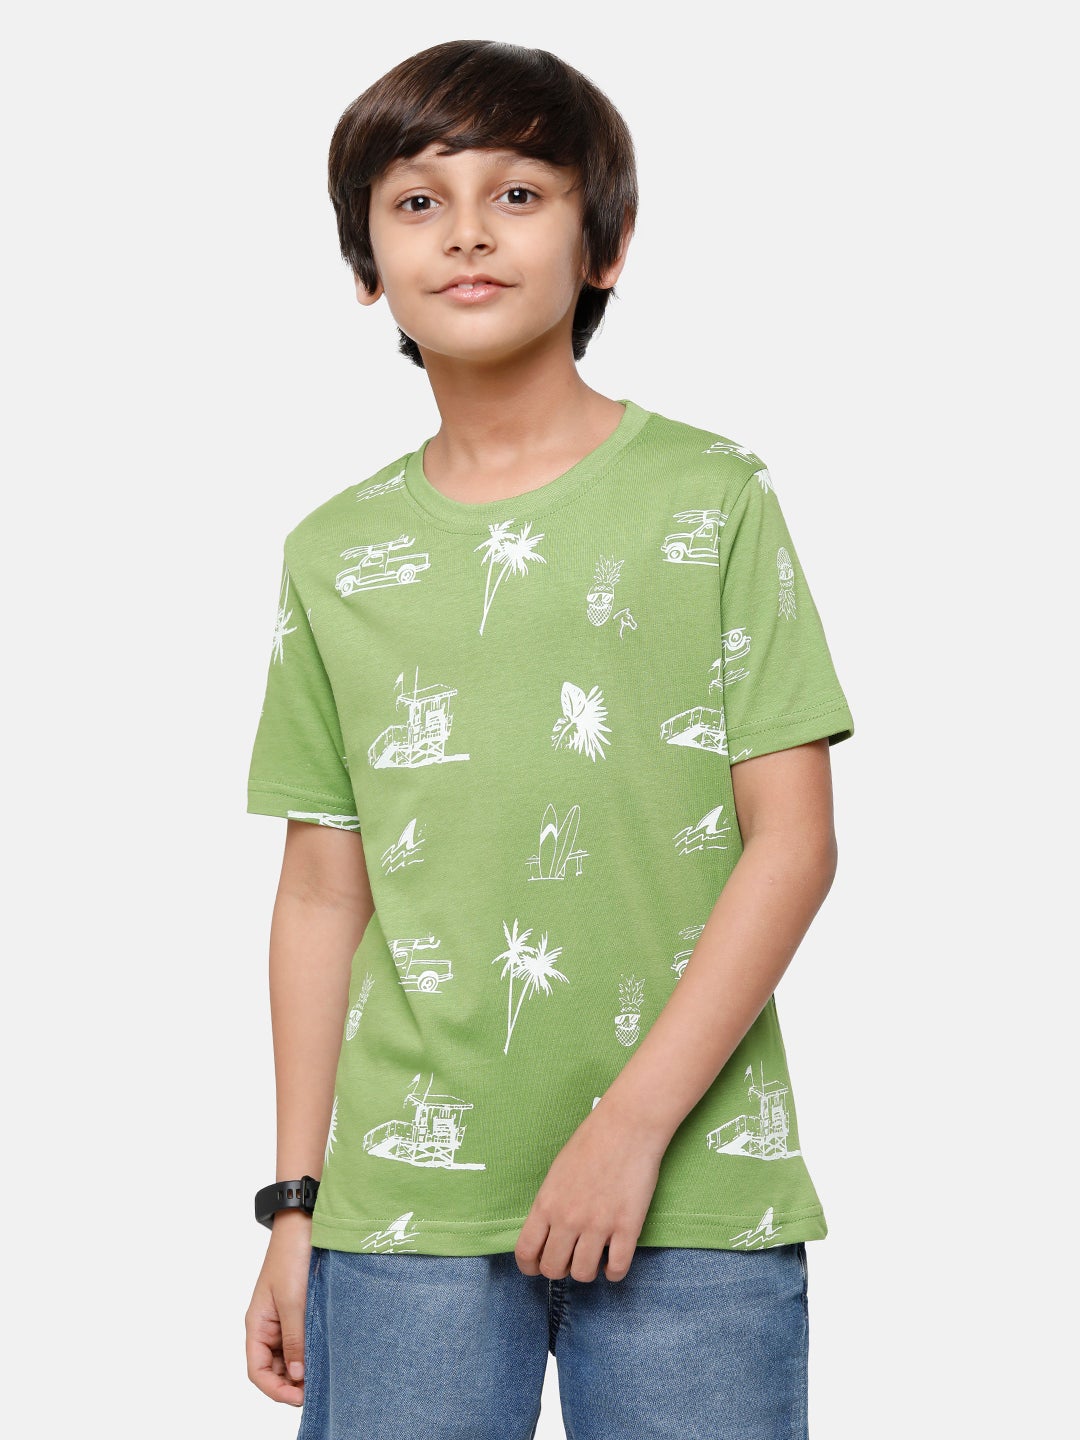 CP Boys 100% Cotton Printed Half Sleeve Slim Fit Round Neck T-Shirt T-shirt Classic Polo 